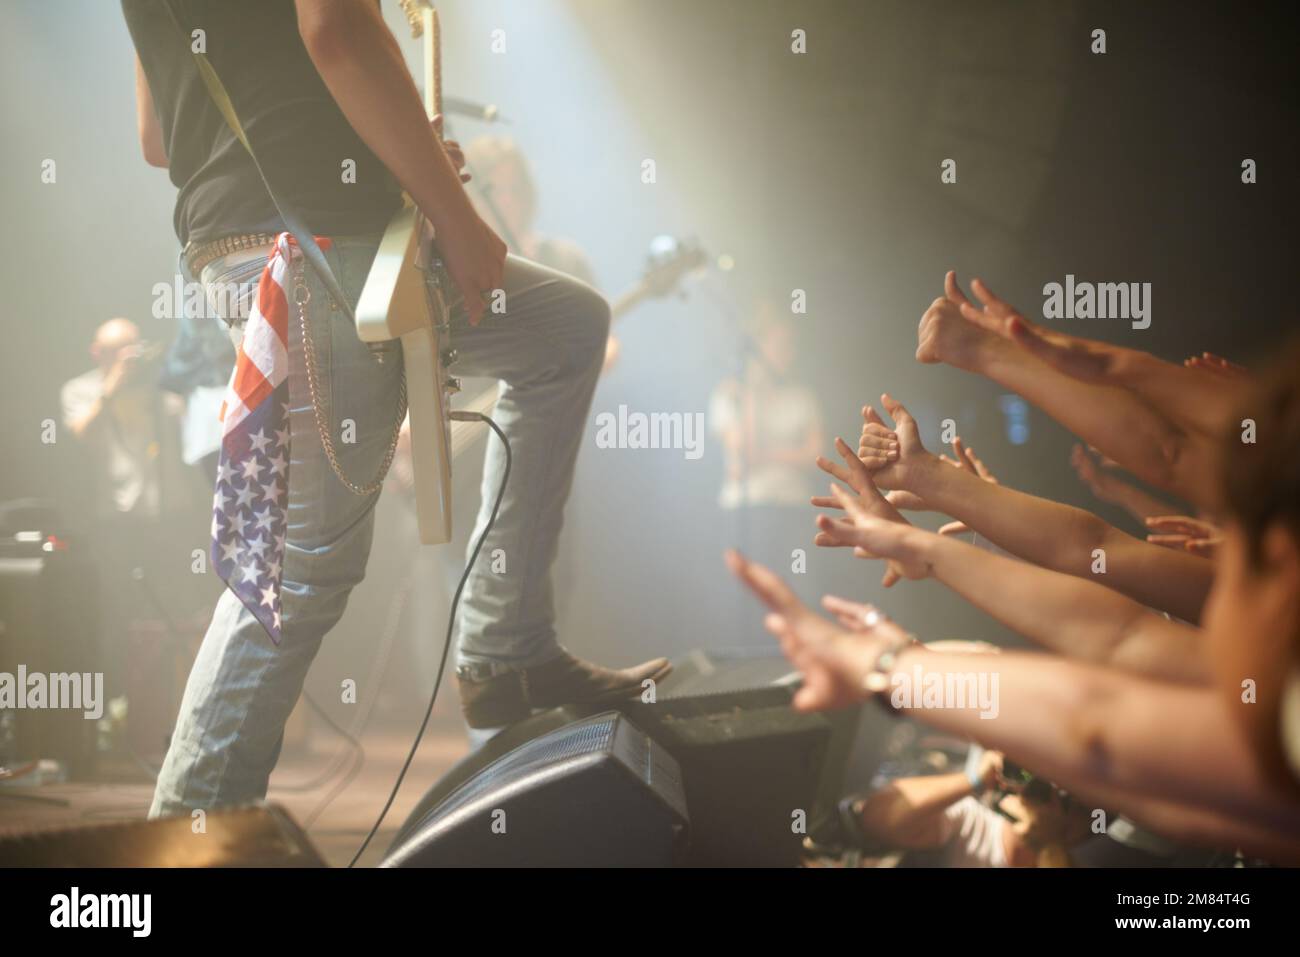 They cant get enough. a crowd of music fans reaching up at a guitarist on stage. Stock Photo